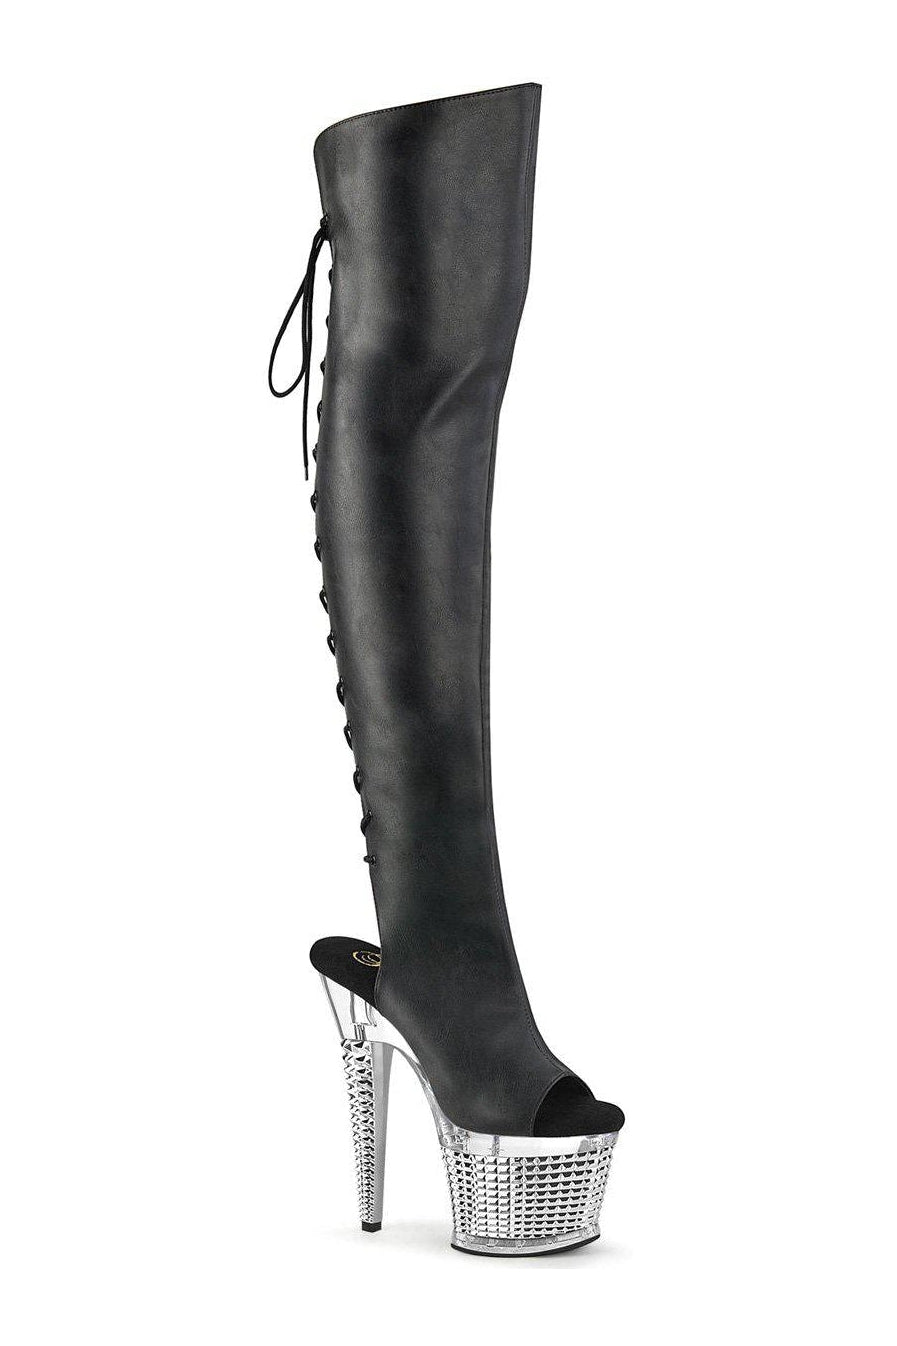 SPECTATOR-3019 Thigh Boot | Black Faux Leather-Thigh Boots-Pleaser-Black-10-Faux Leather-SEXYSHOES.COM